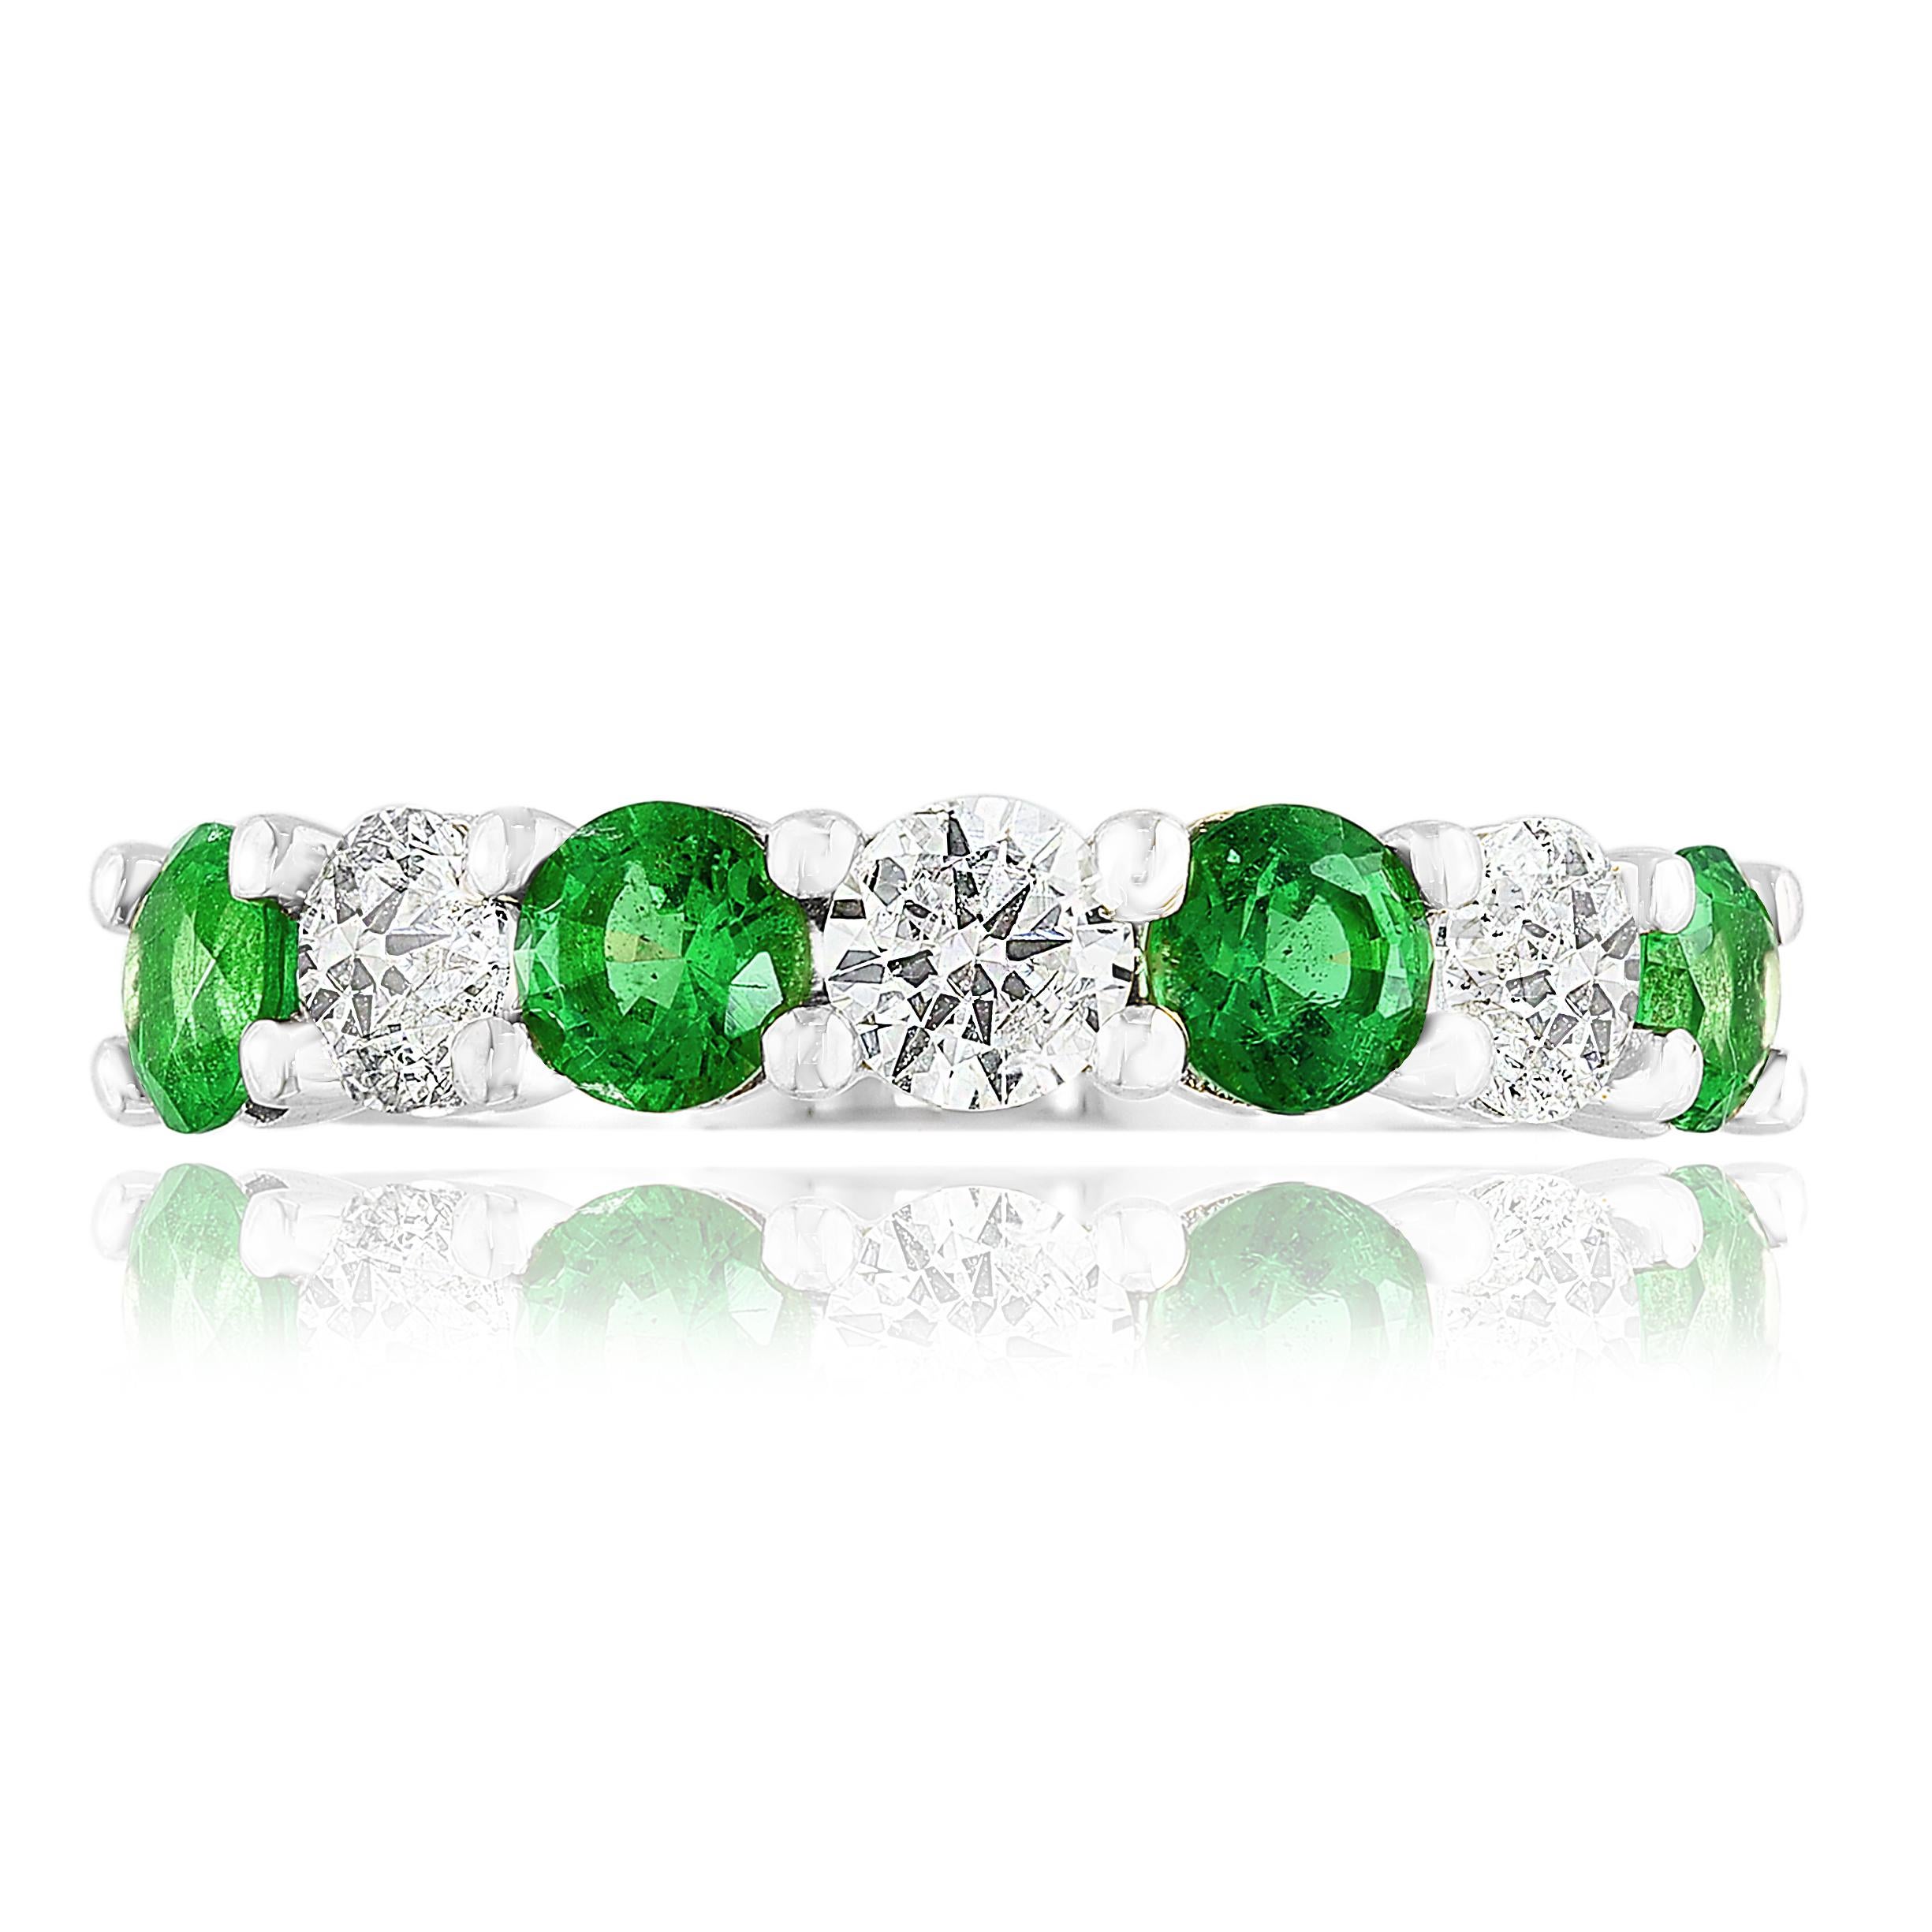 A fashionable and classic wedding band showcasing 4 color-rich green emeralds weighing 0.97 carats total that alternate with 3 brilliant round diamonds weighing 0.73 carats total. Stones secured with a shared prong setting made with 14 karats white